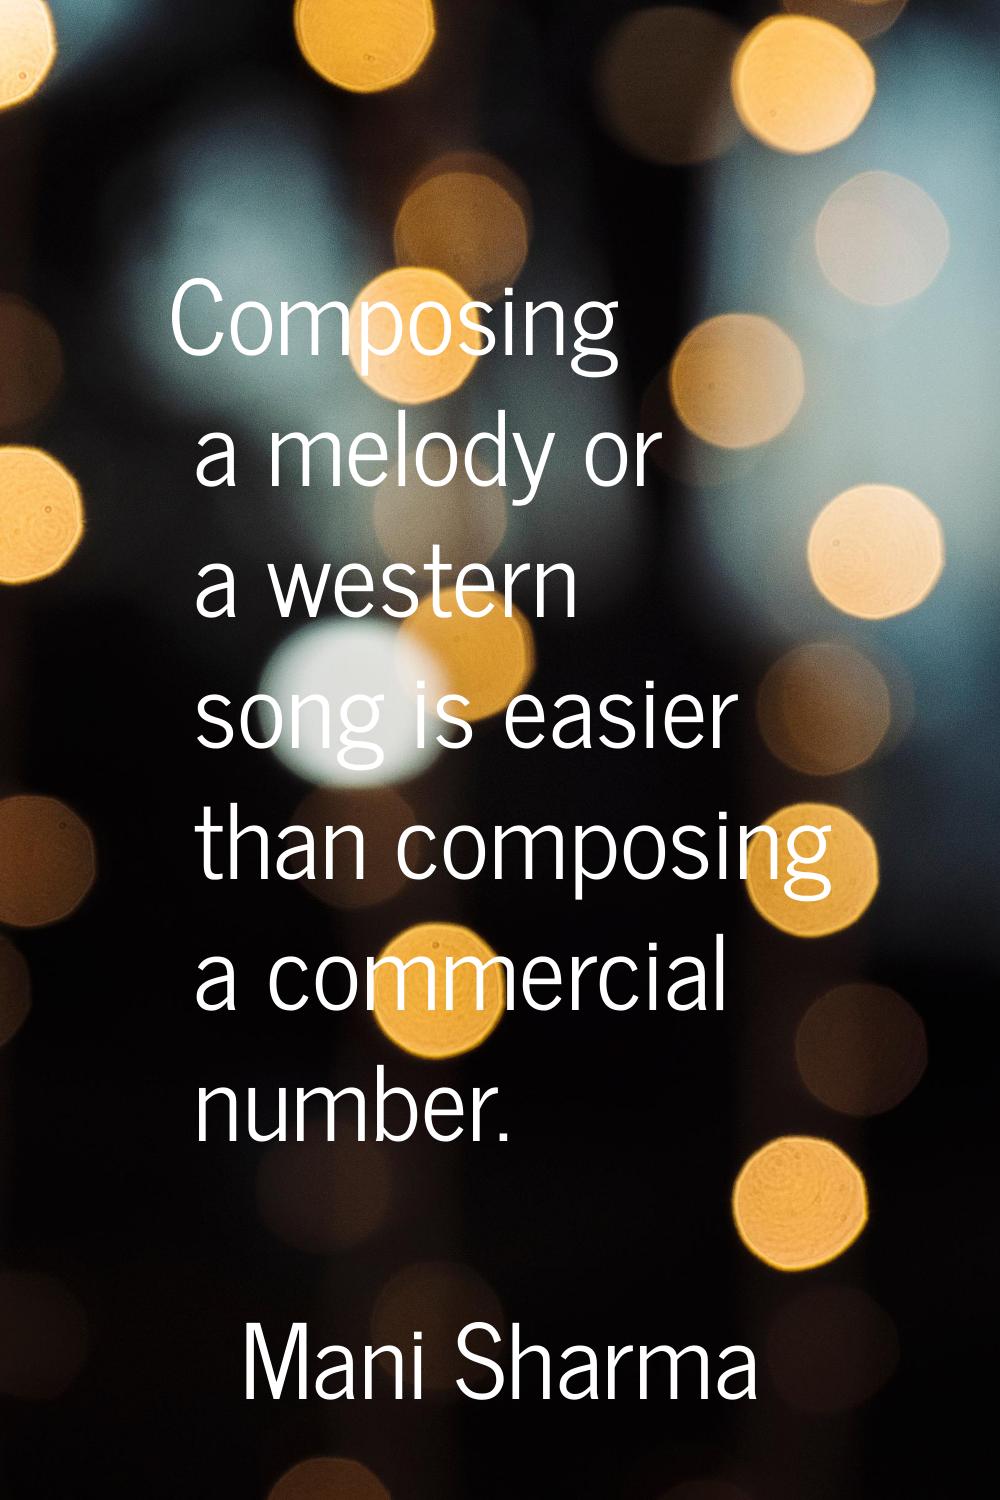 Composing a melody or a western song is easier than composing a commercial number.